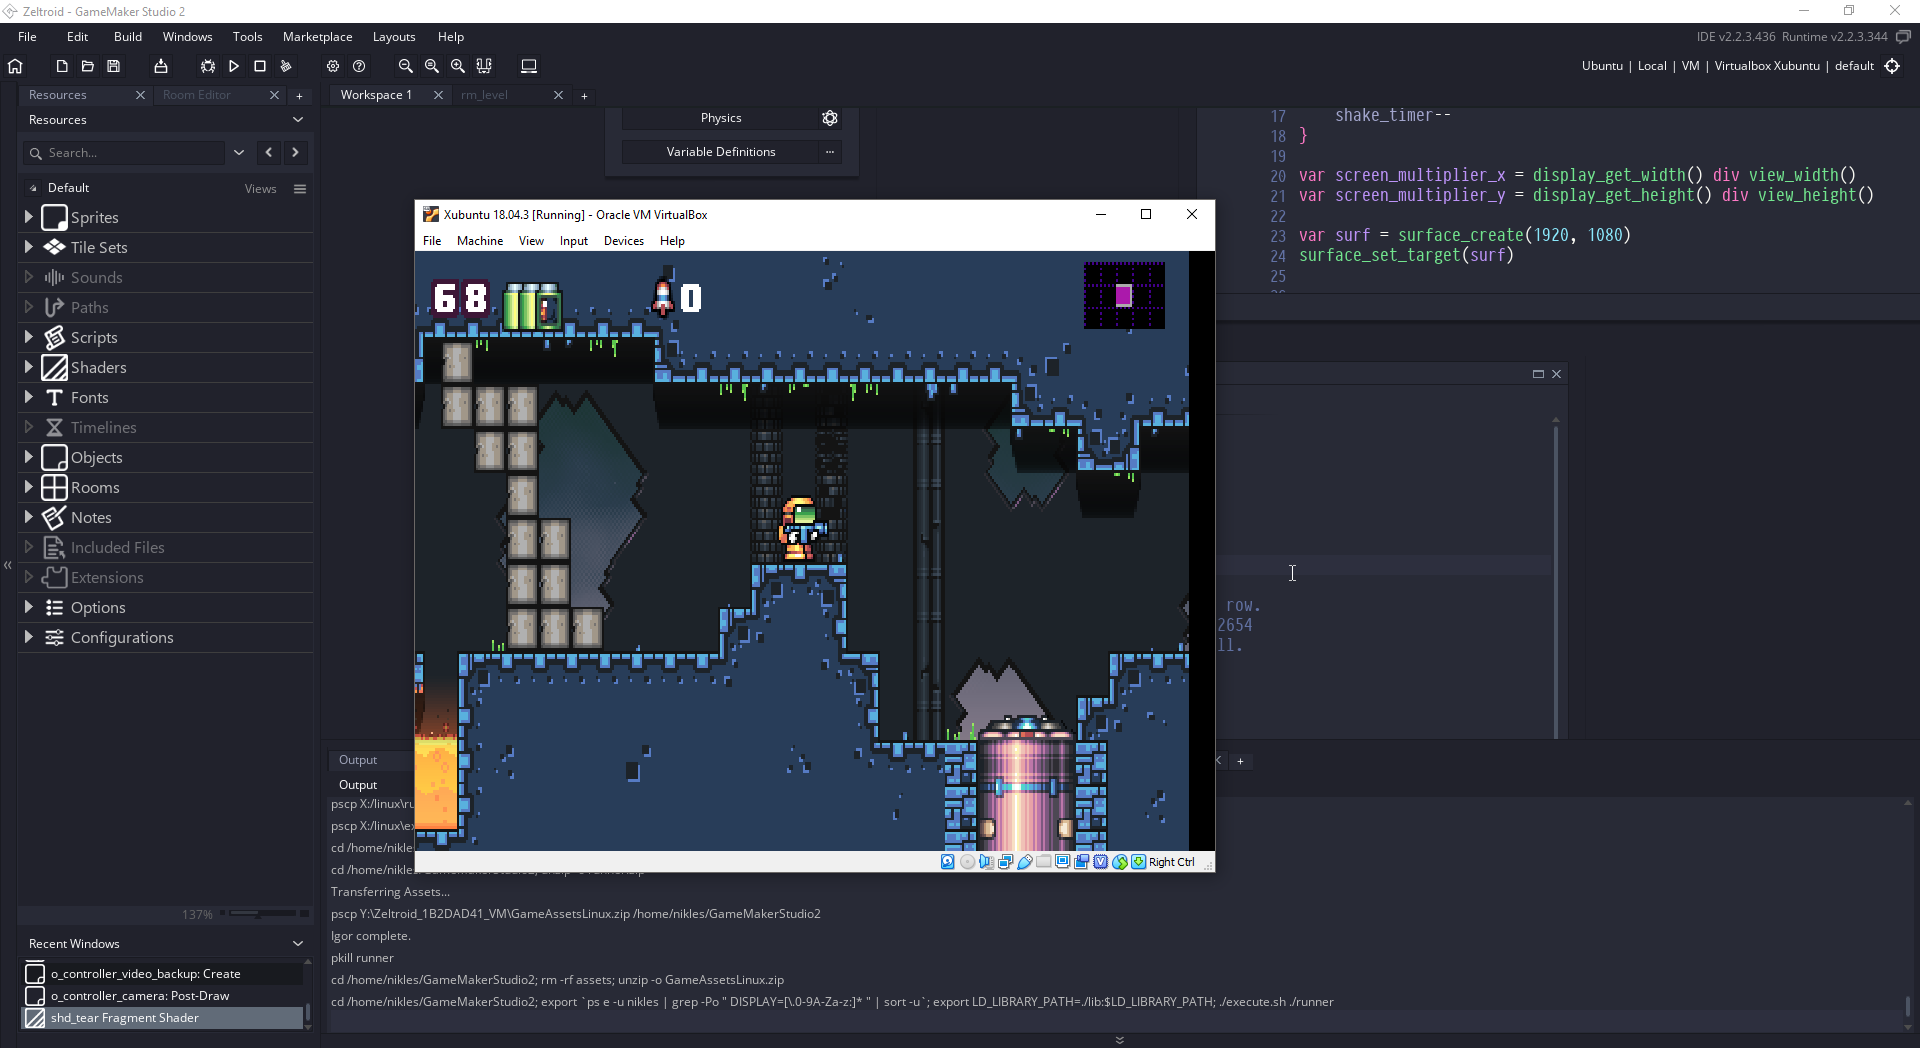 Gamemaker 2 is now free! Or is it? 